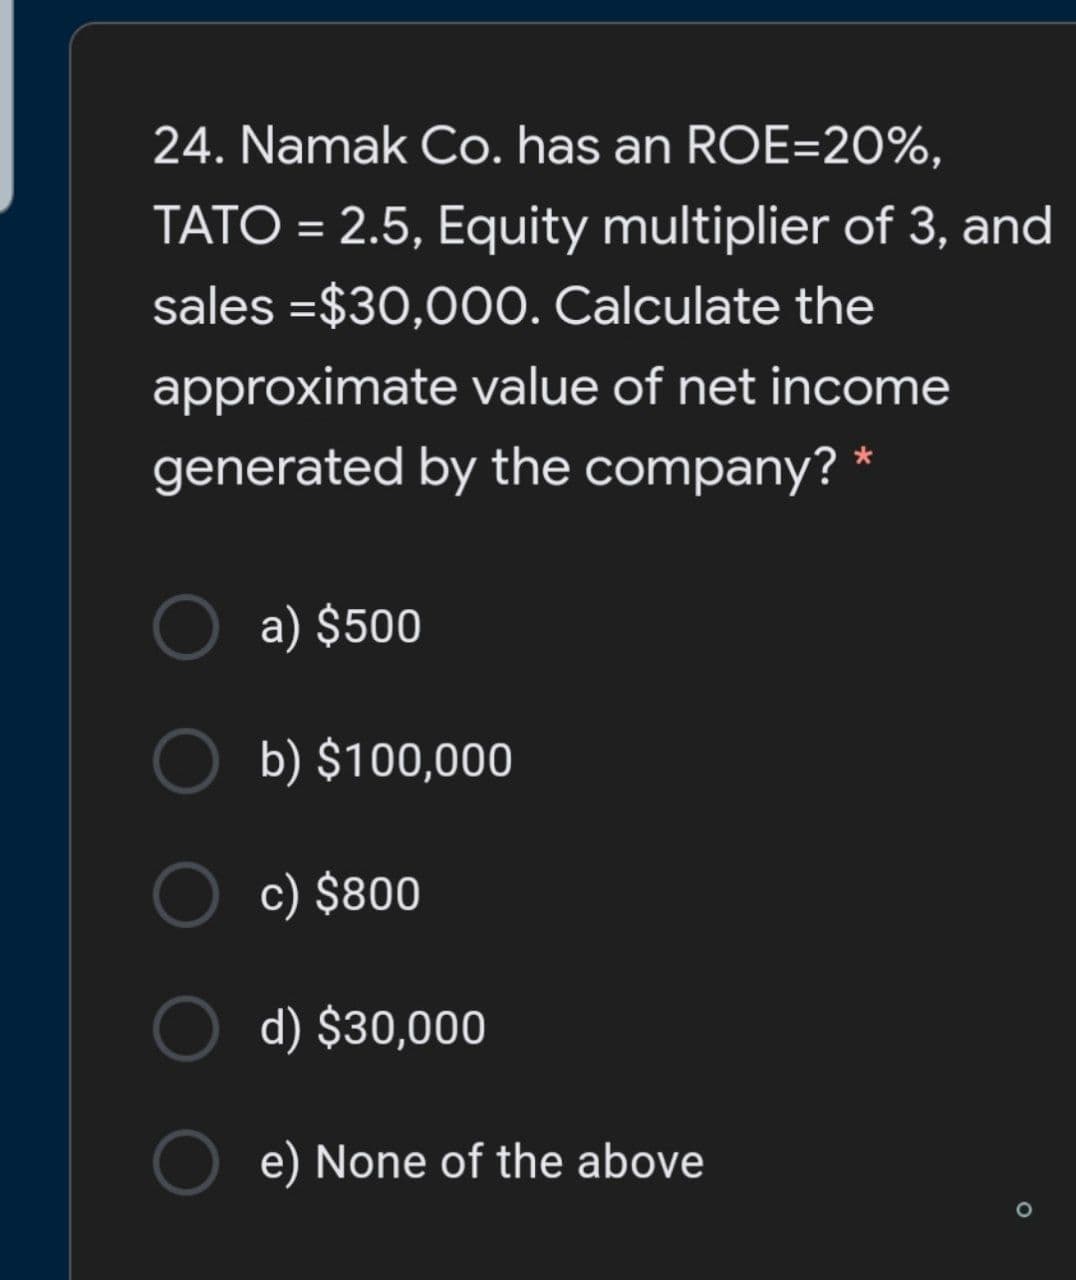 24. Namak Co. has an ROE=20%,
TATO = 2.5, Equity multiplier of 3, and
sales =$30,000. Calculate the
approximate value of net income
generated by the company? *
a) $500
b) $100,000
c) $800
d) $30,000
e) None of the above
